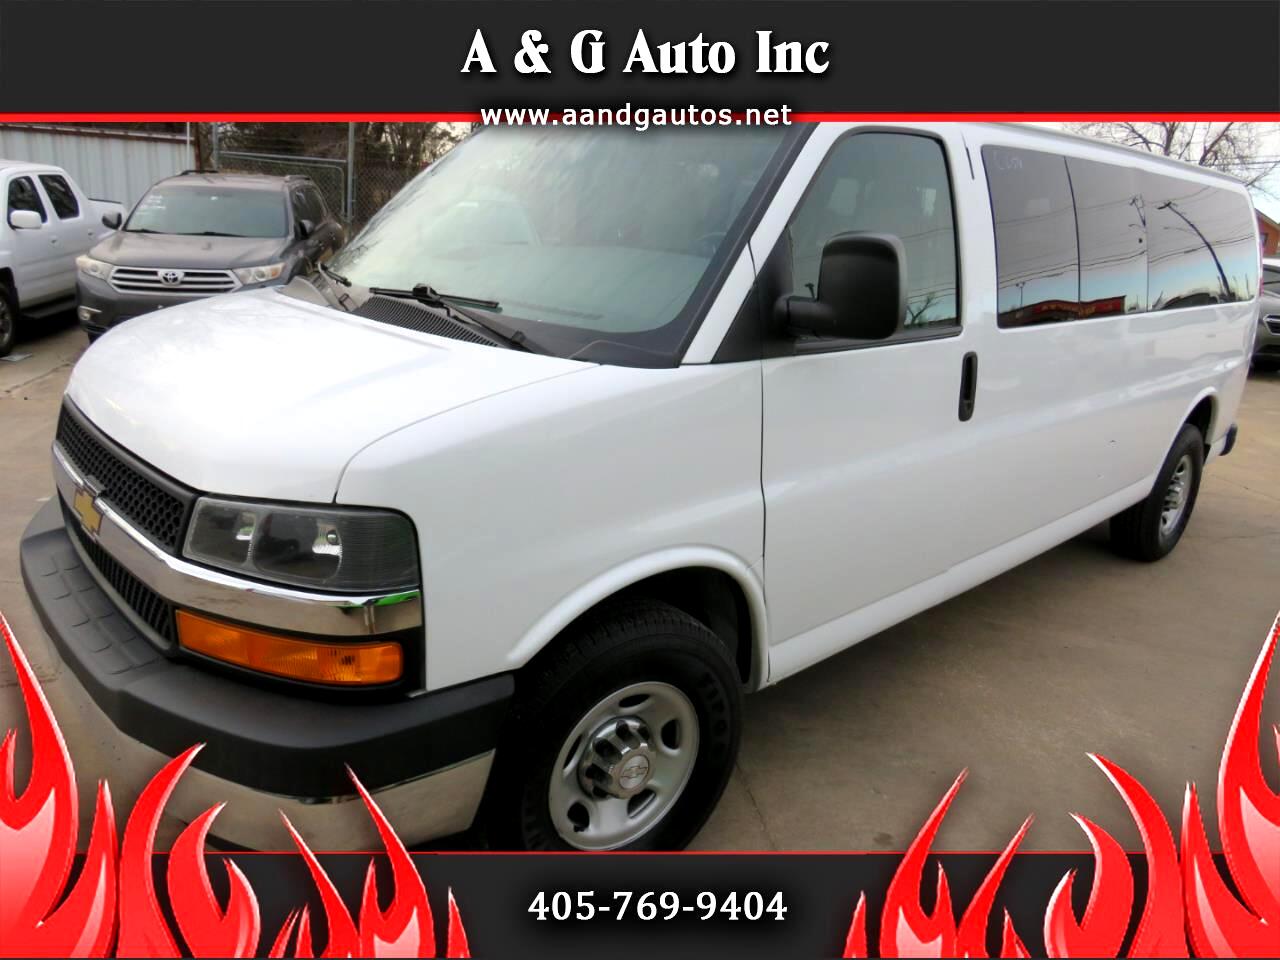 2018 Chevrolet Express for sale in Oklahoma City OK 73141 by A & G Auto Inc